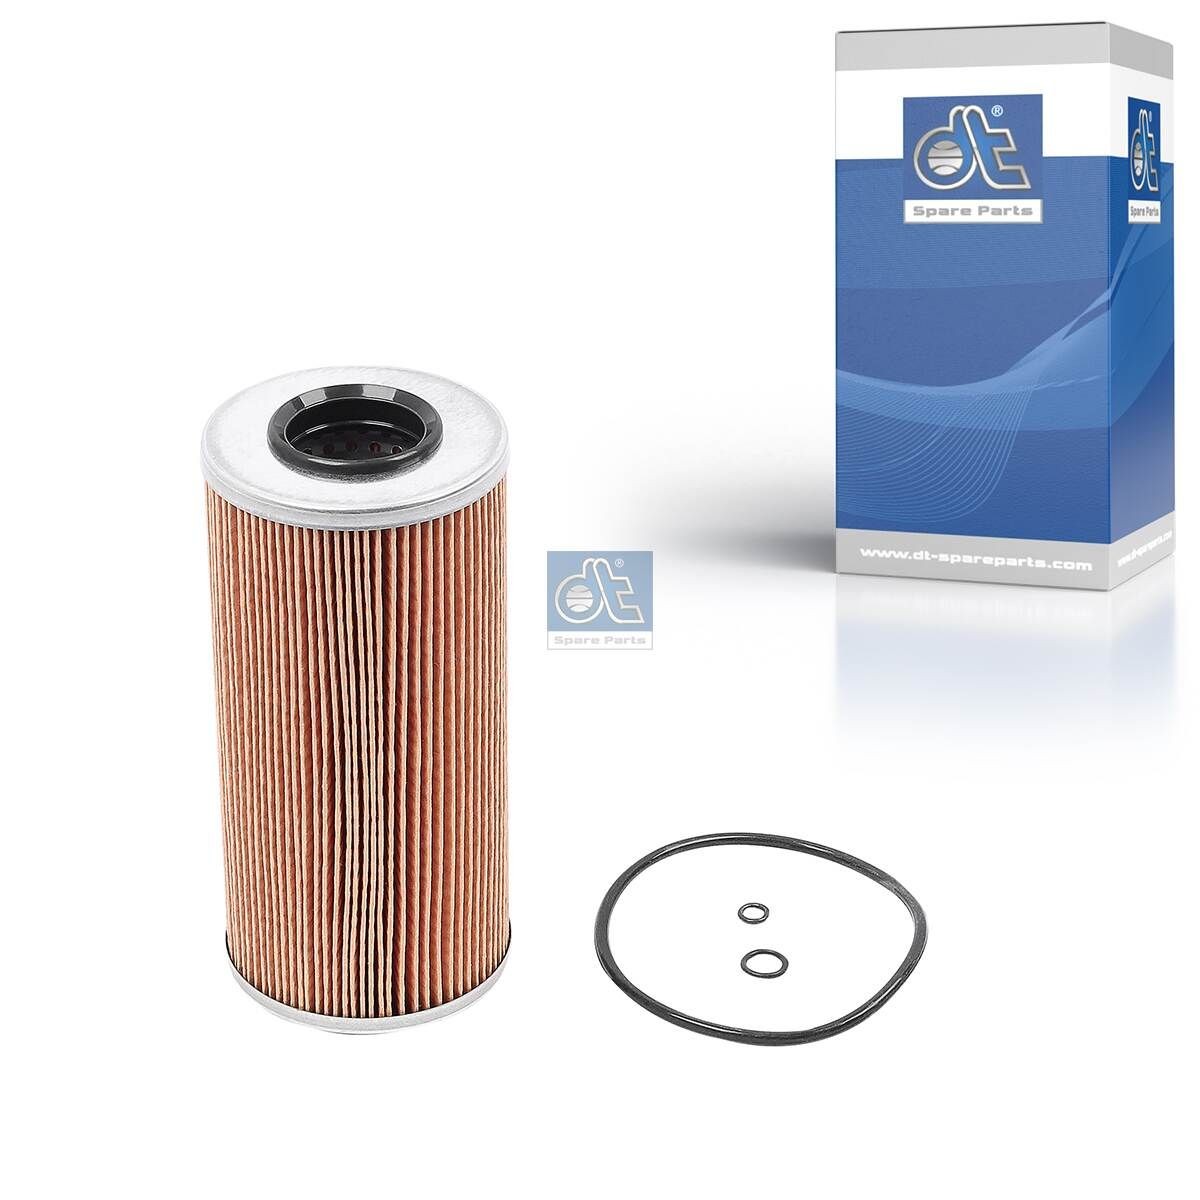 HU 951 x DT Spare Parts 3.14108 Oil filter 661.180.32.09